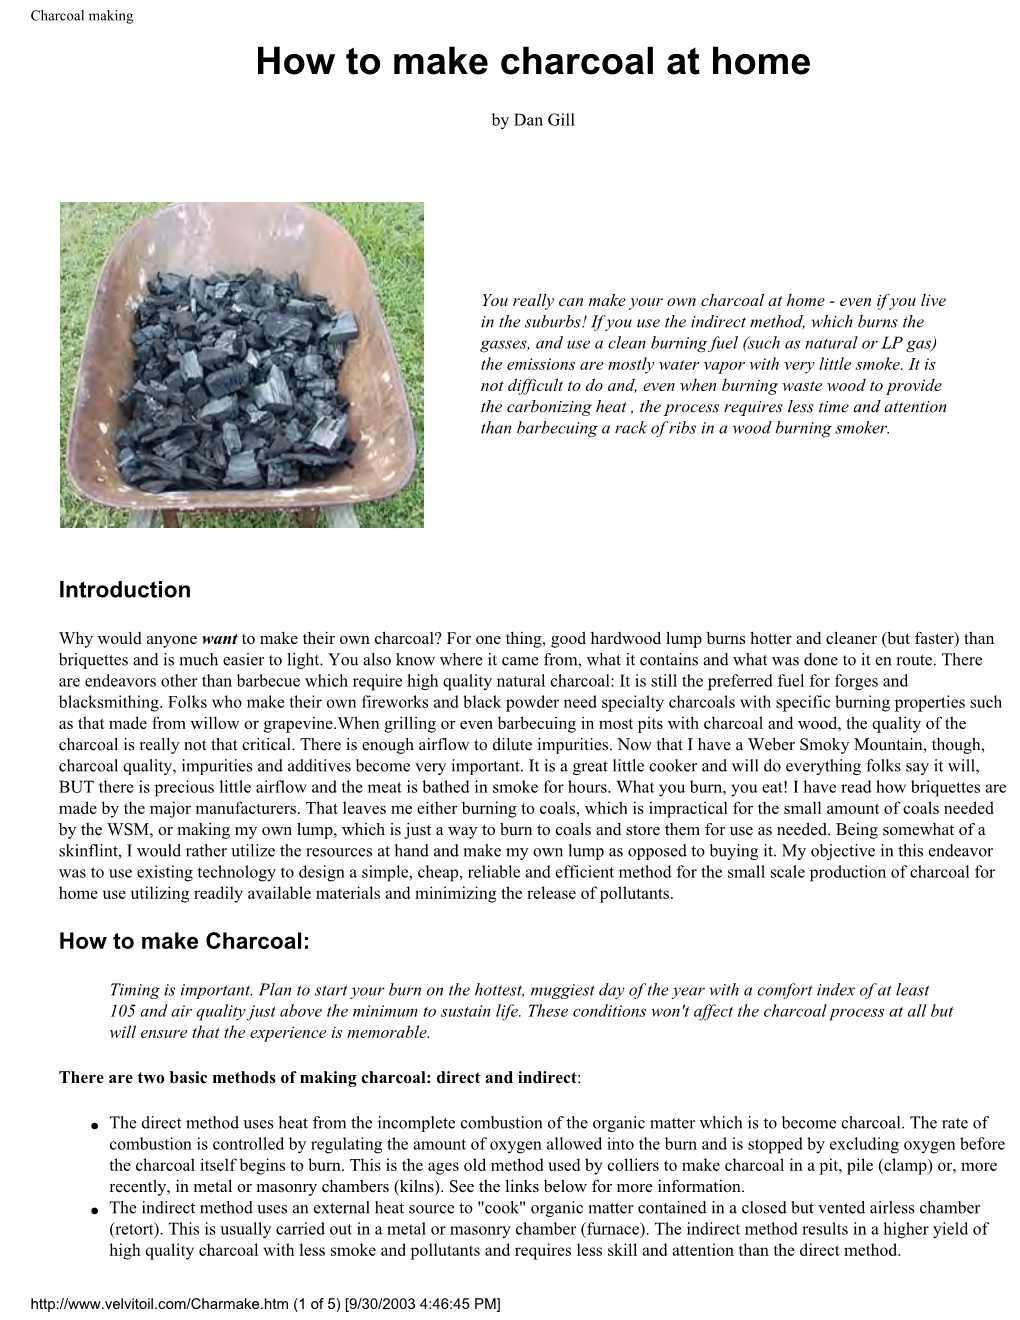 Charcoal Making How to Make Charcoal at Home